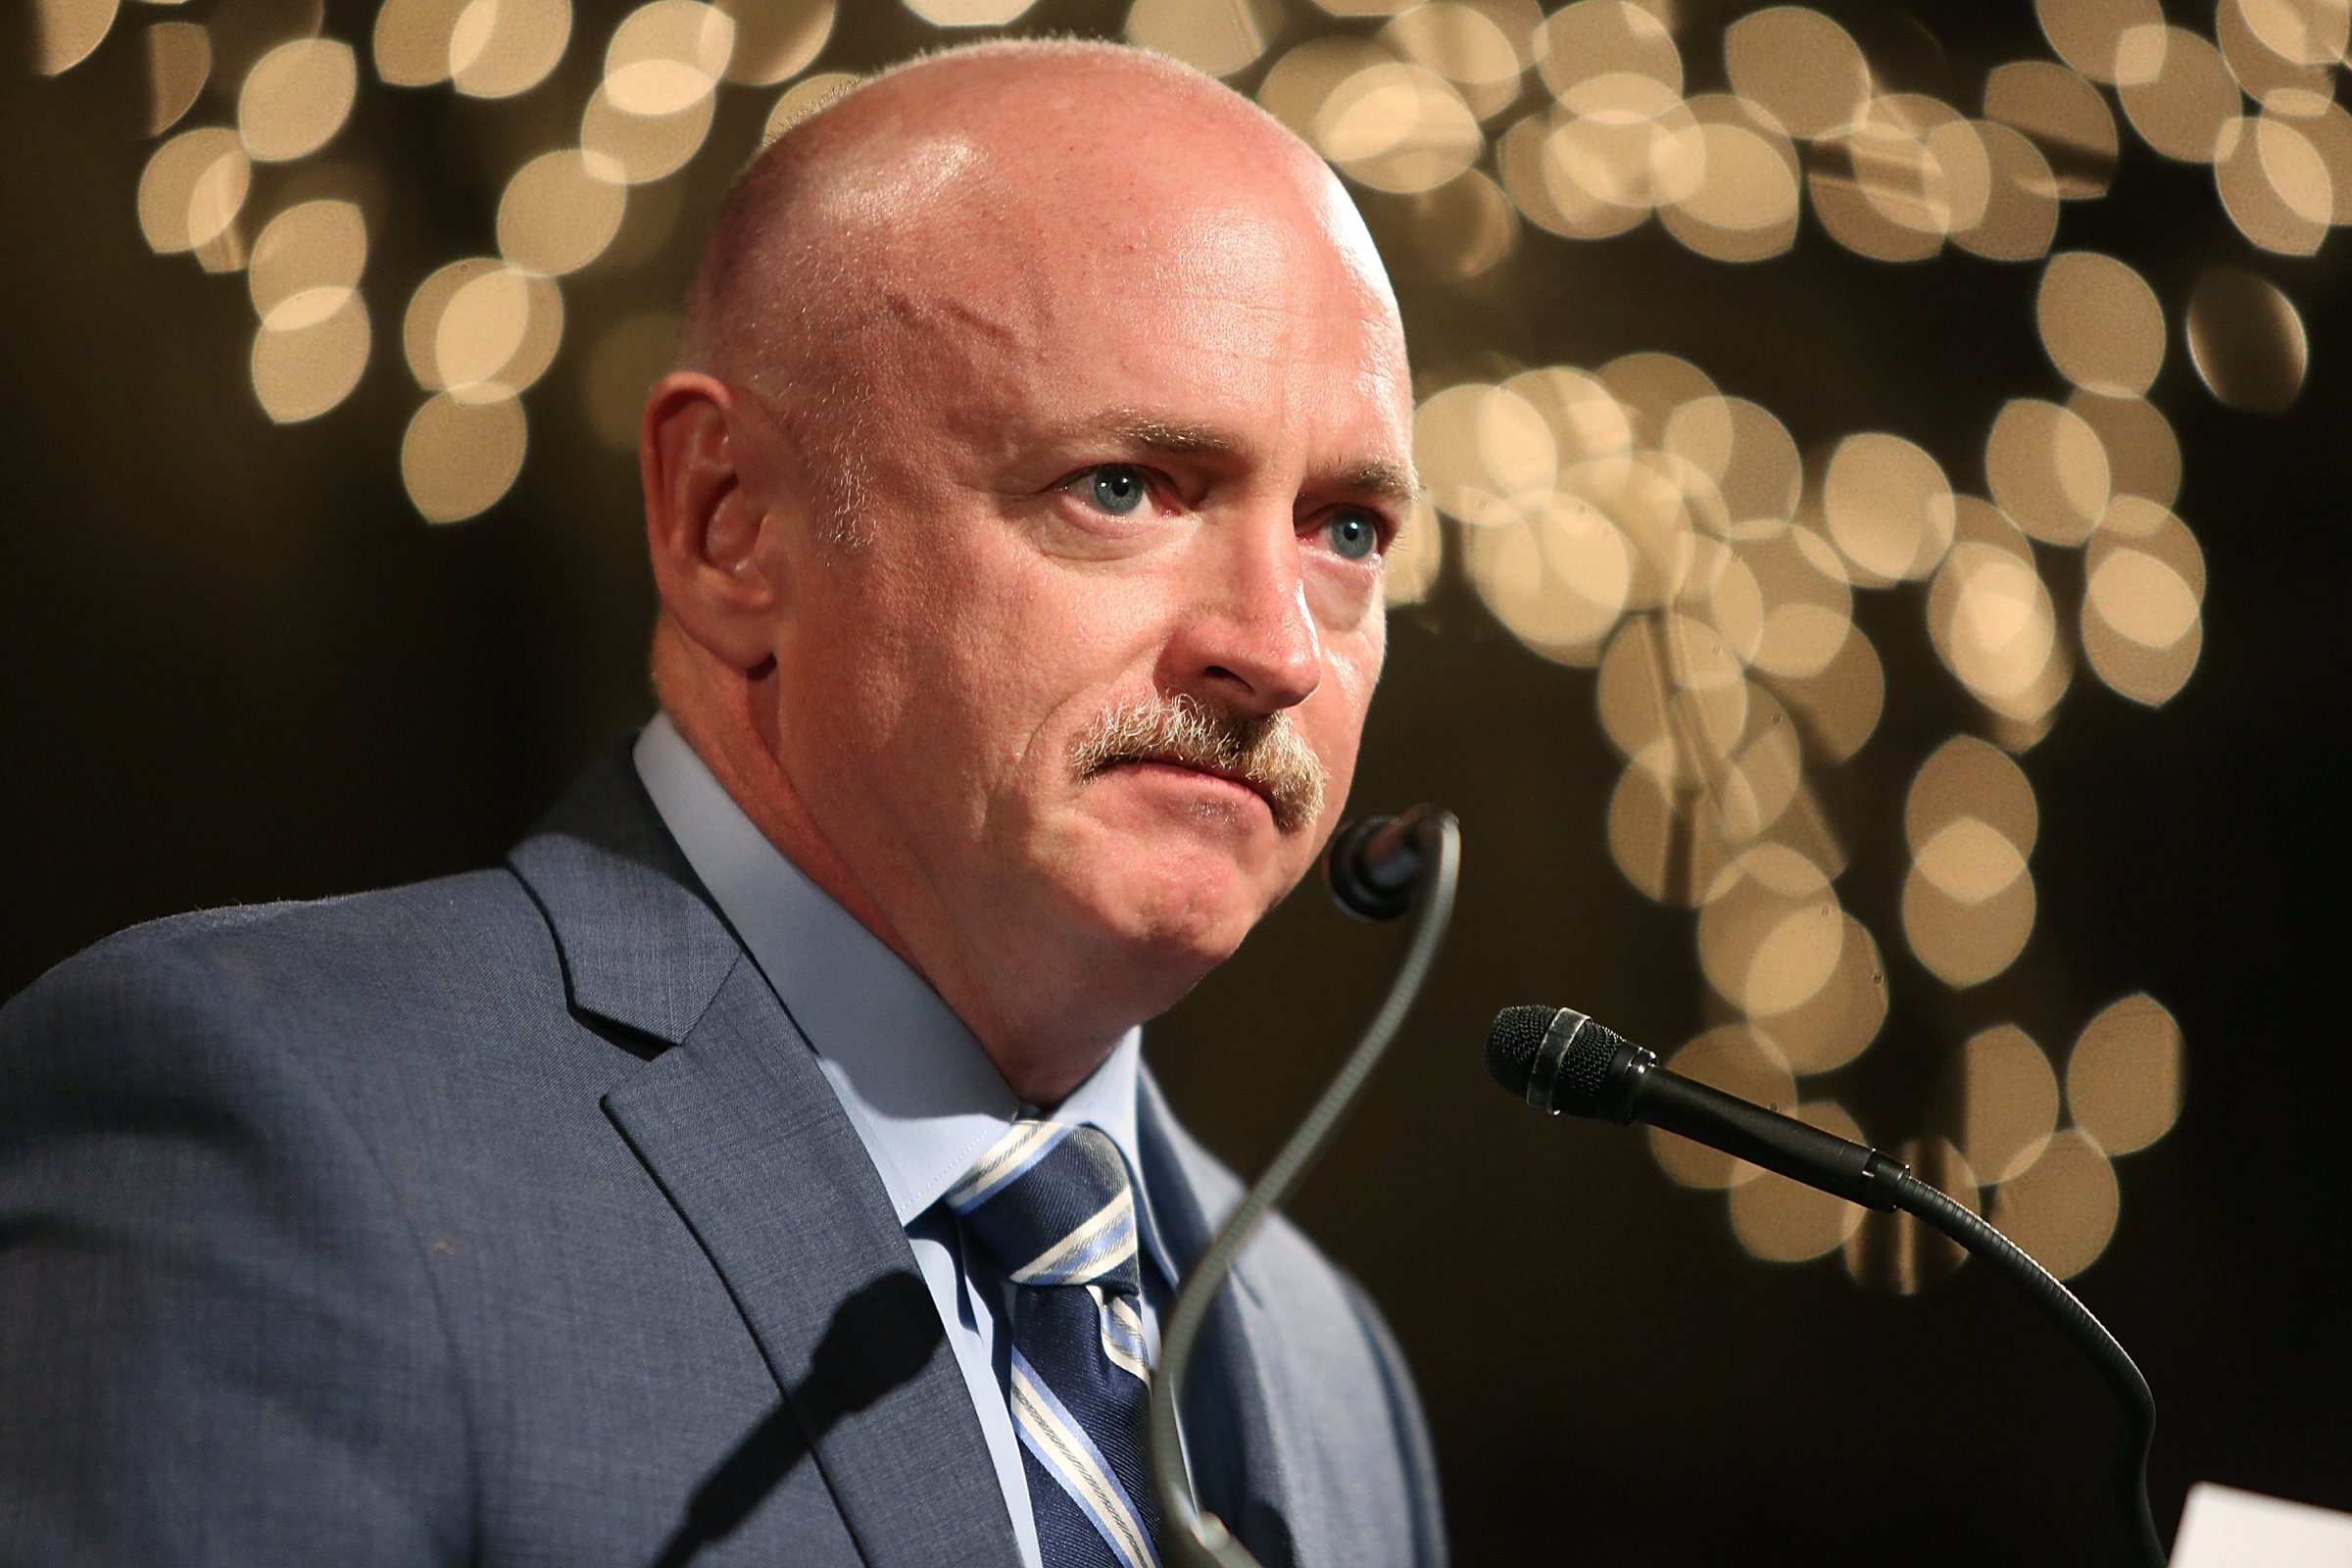 Captain Mark Kelly speaks at the 'Not One More' Event in New York City on Feb. 10, 2015.